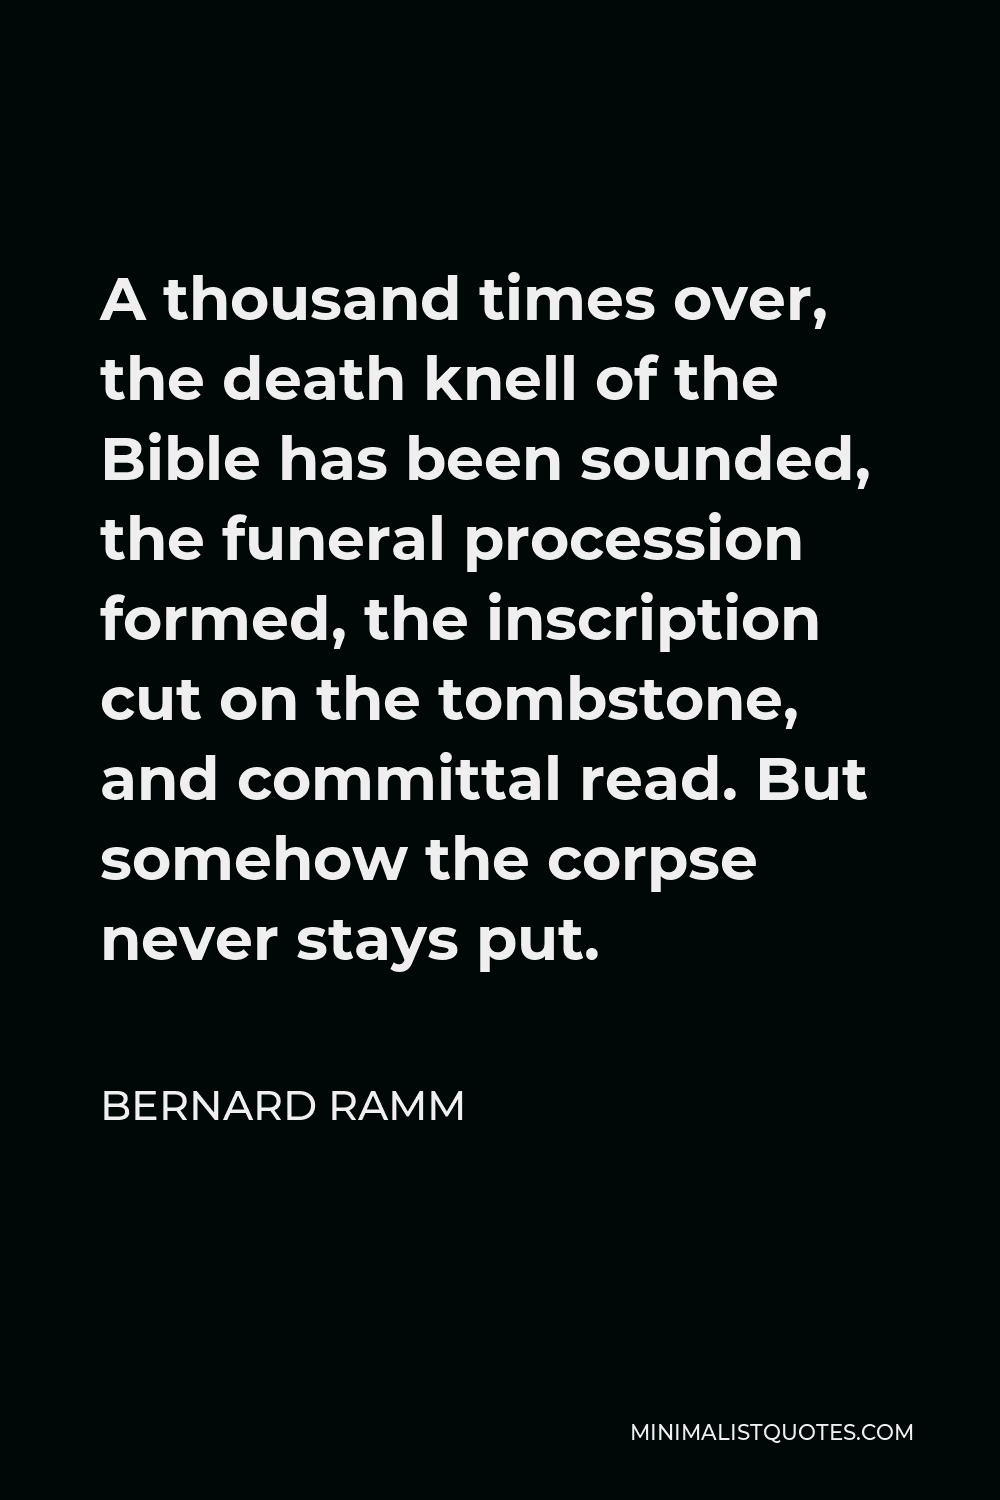 Bernard Ramm Quote - A thousand times over, the death knell of the Bible has been sounded, the funeral procession formed, the inscription cut on the tombstone, and committal read. But somehow the corpse never stays put.